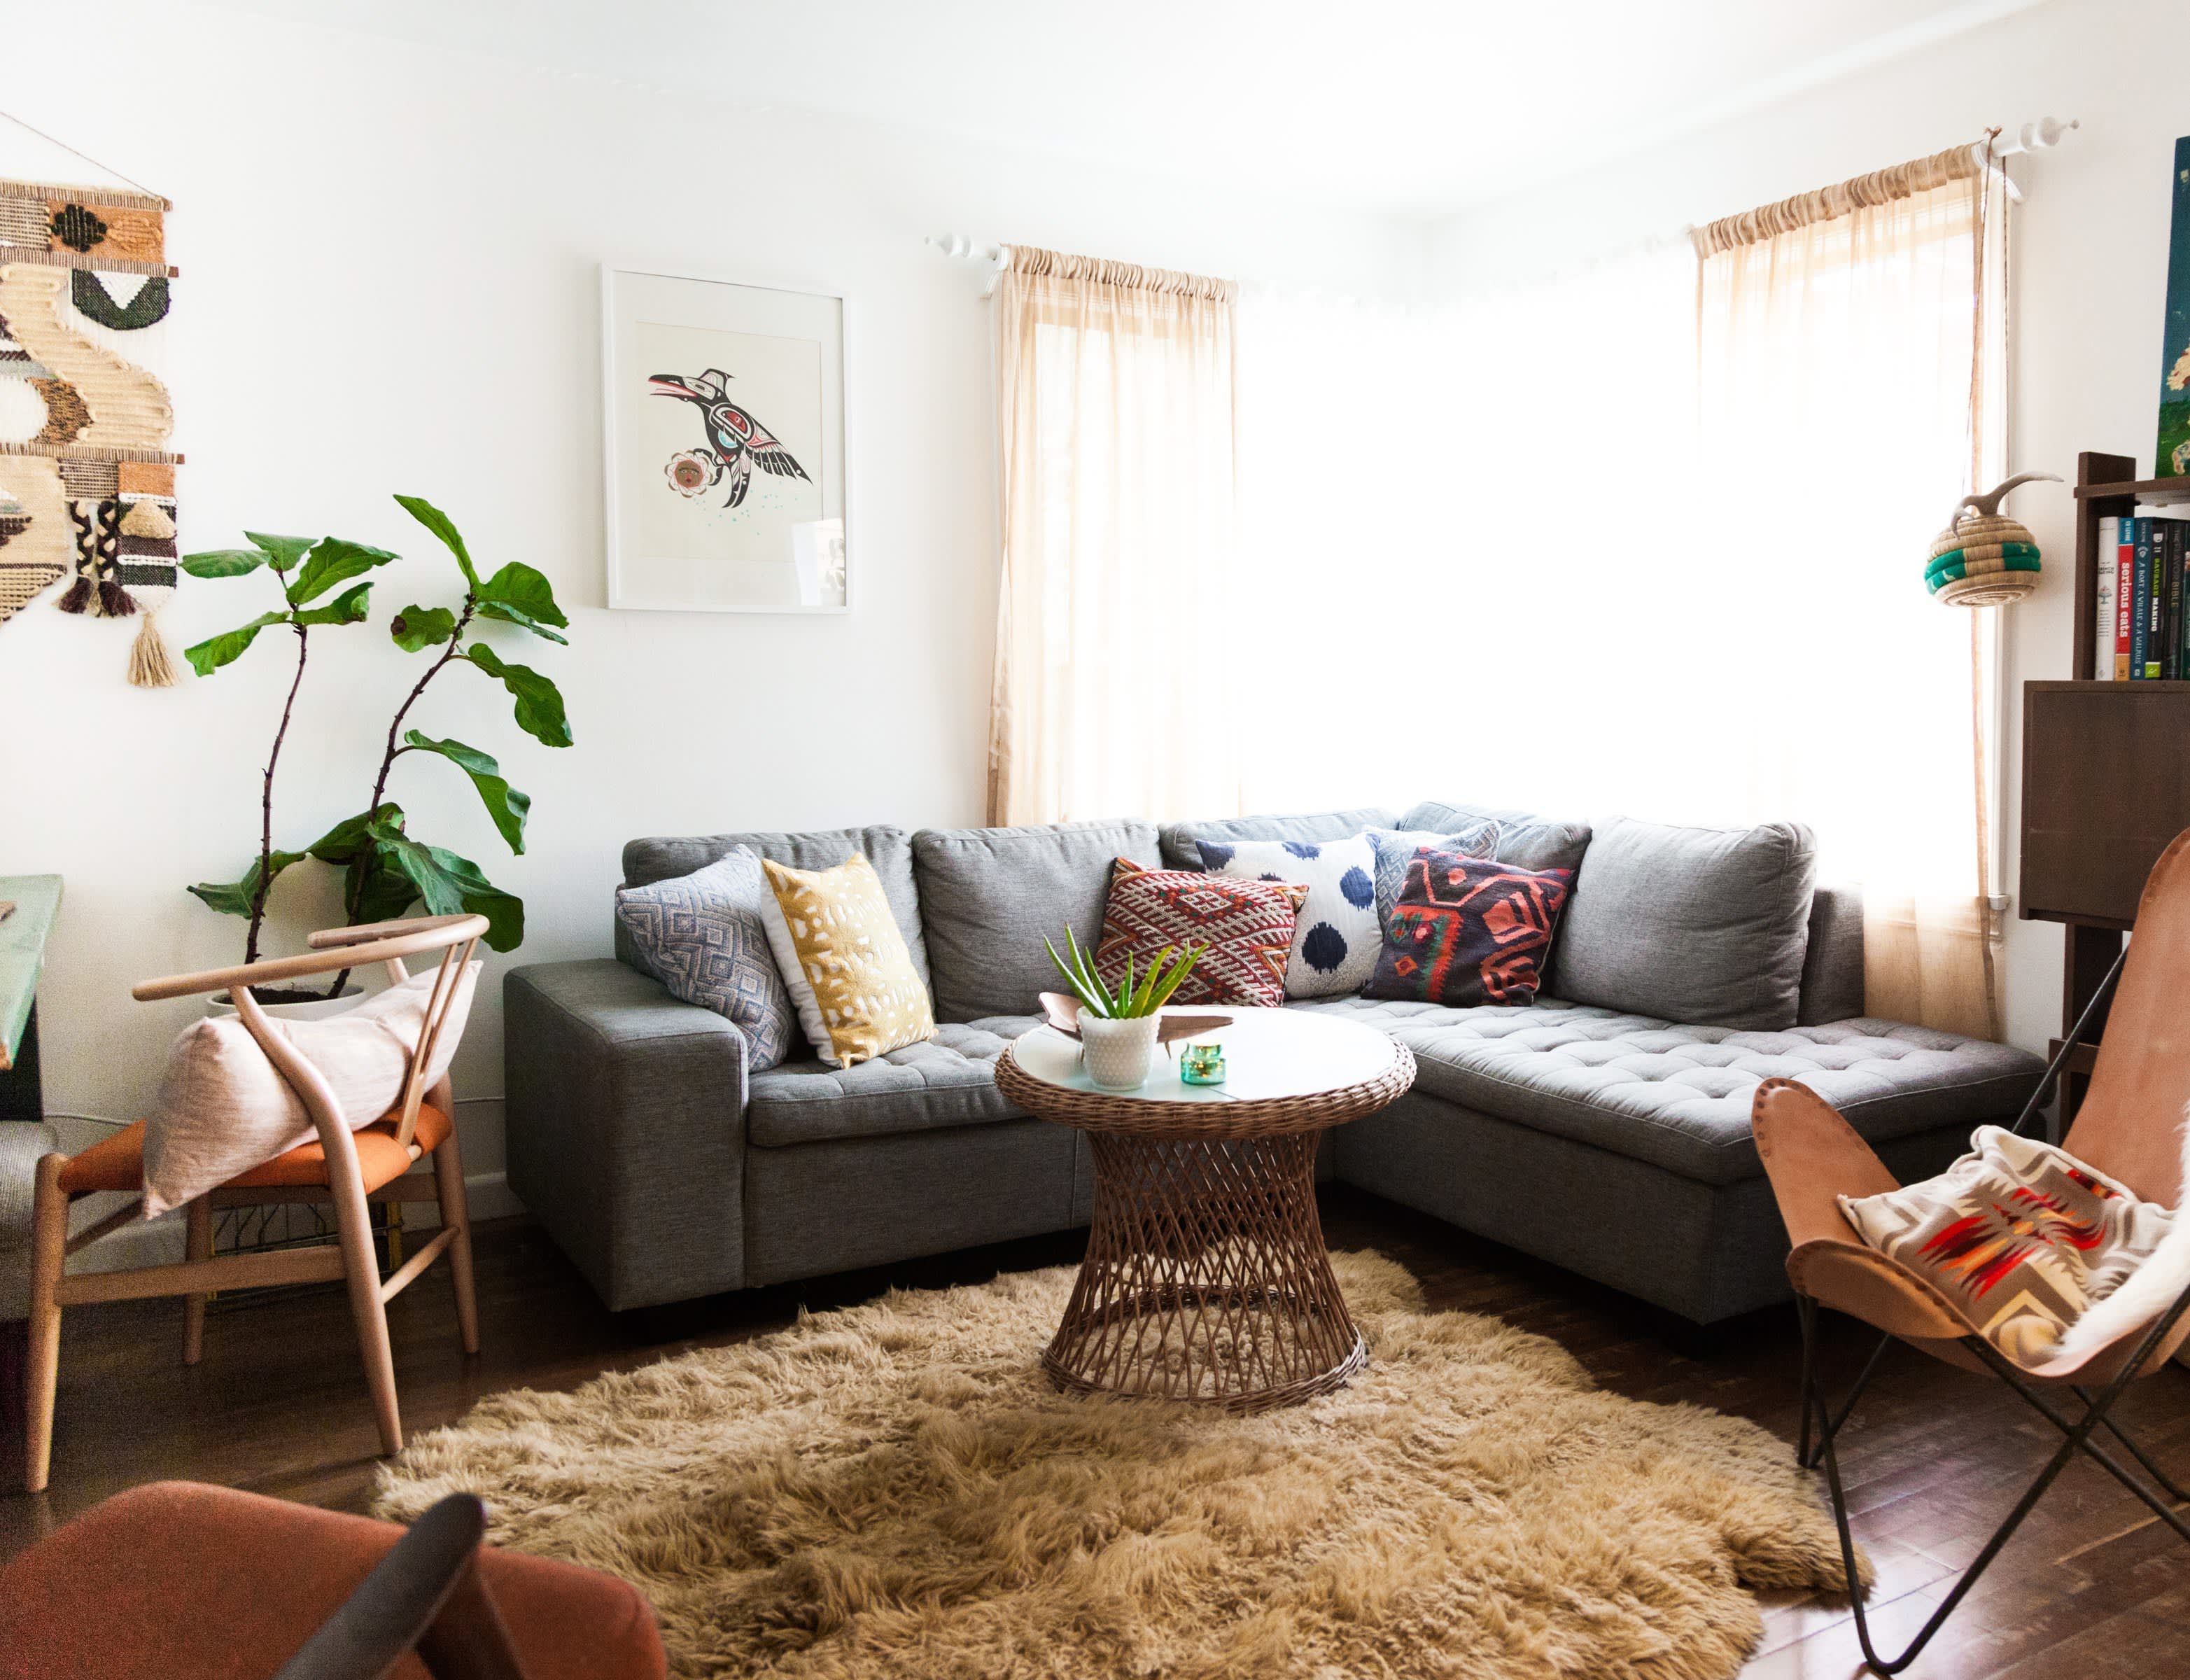 House Tour: An Oaxacan-Inspired Rental in Seattle | Apartment Therapy